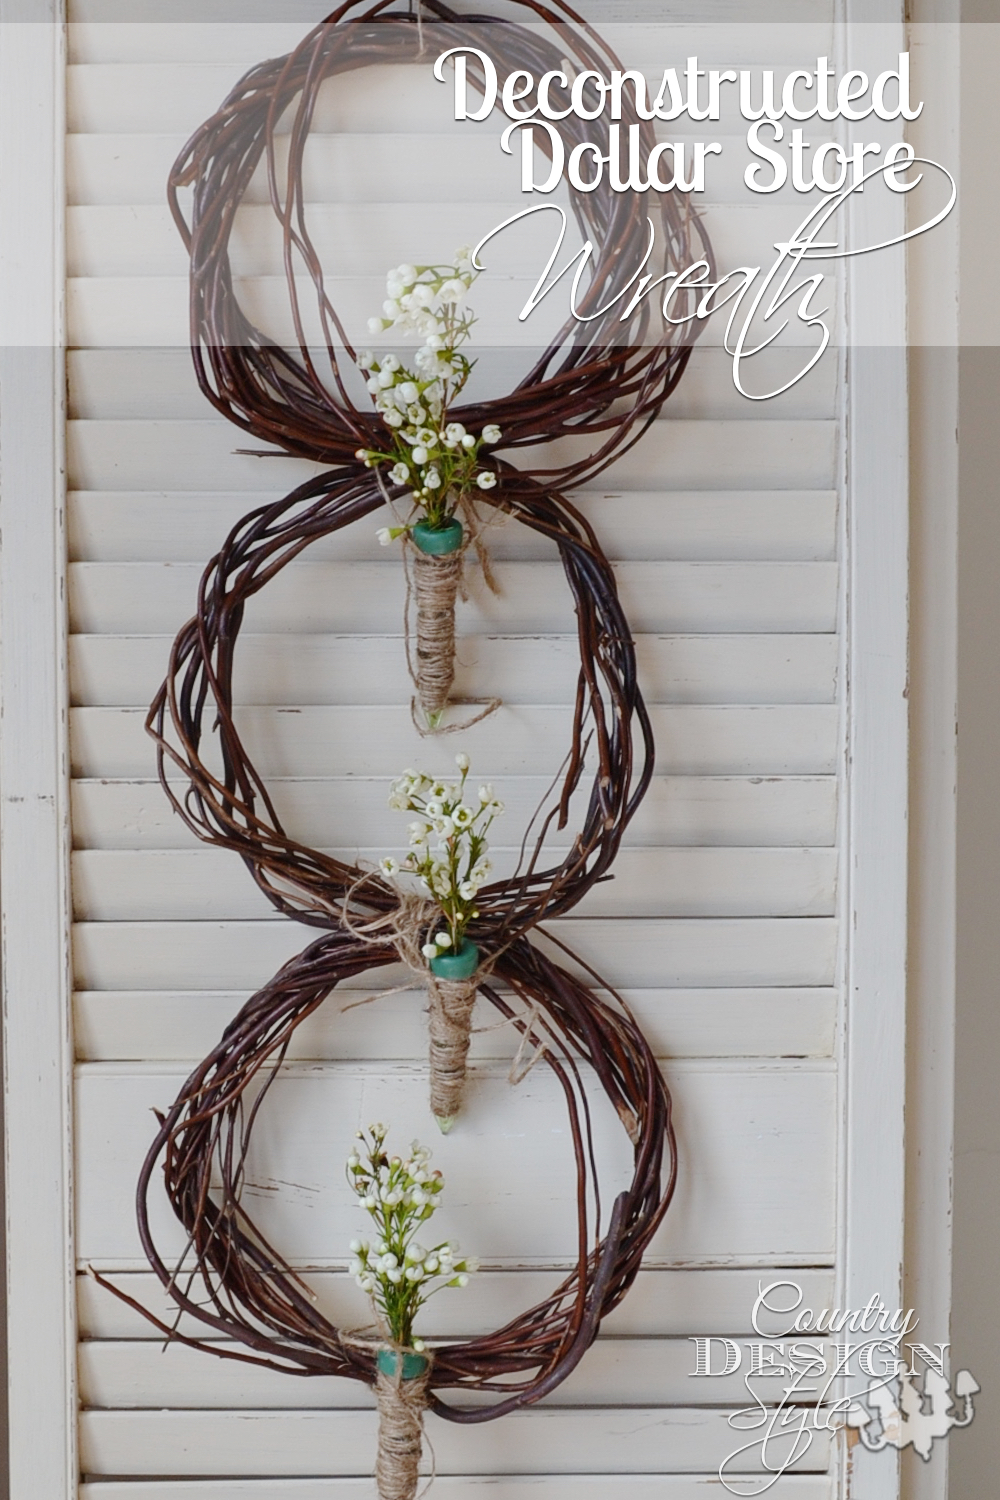 A deconstructed dollar store wreath in 15 minutes. Have you ever bought floral water picks? They are inexpensive and a must have for all you DIY decor. Country Design Style